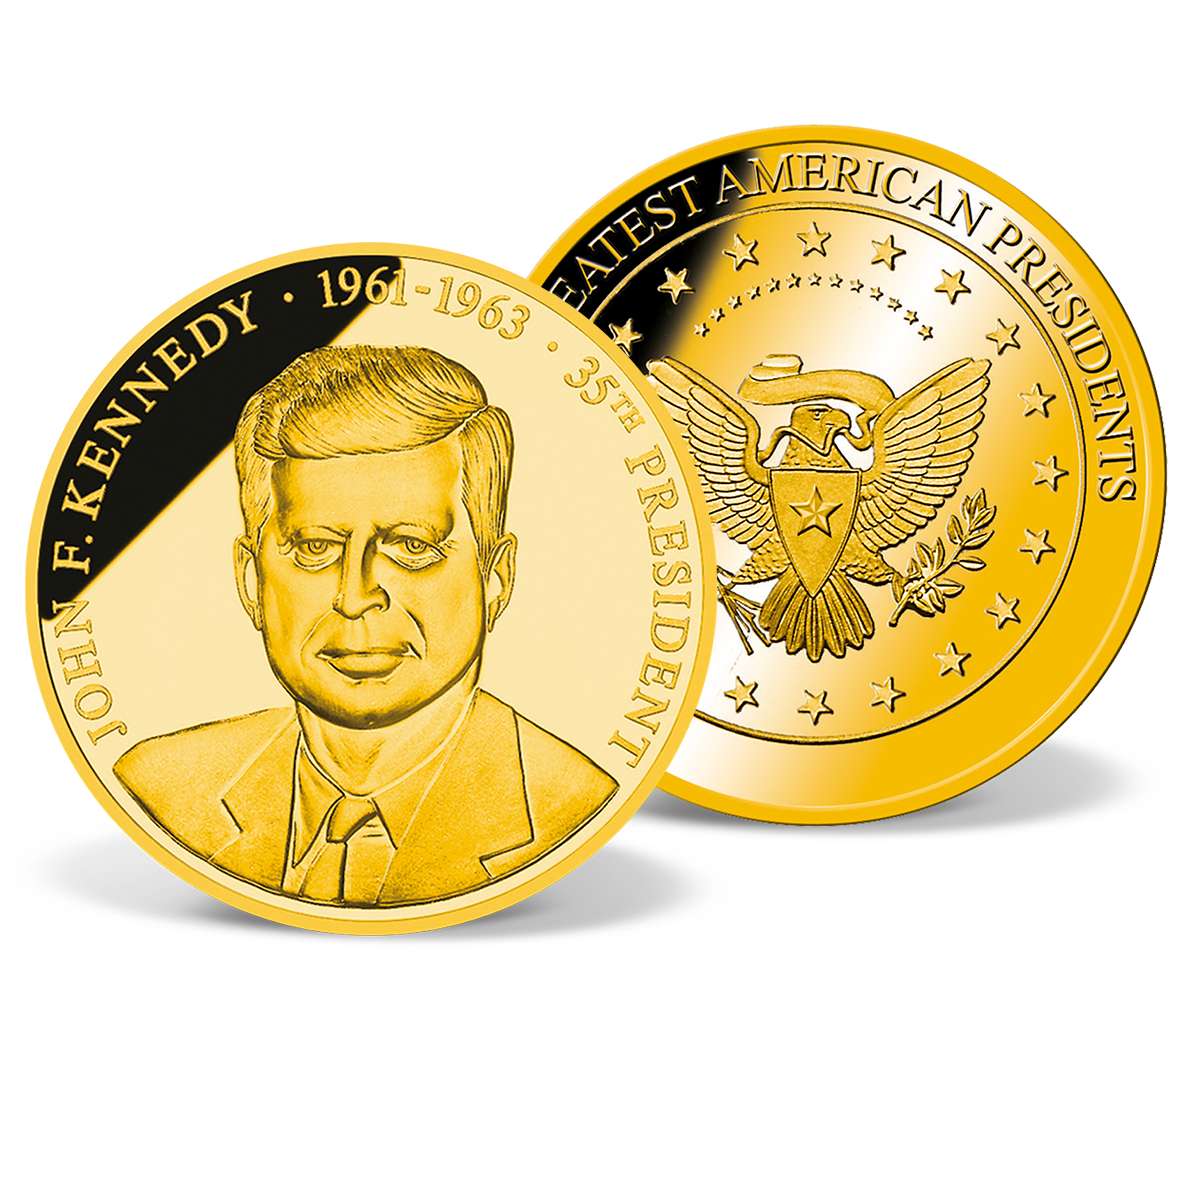 John　American　Commemorative　Solid　Coin　Gold　Gold　F.　Mint　Kennedy　Gold